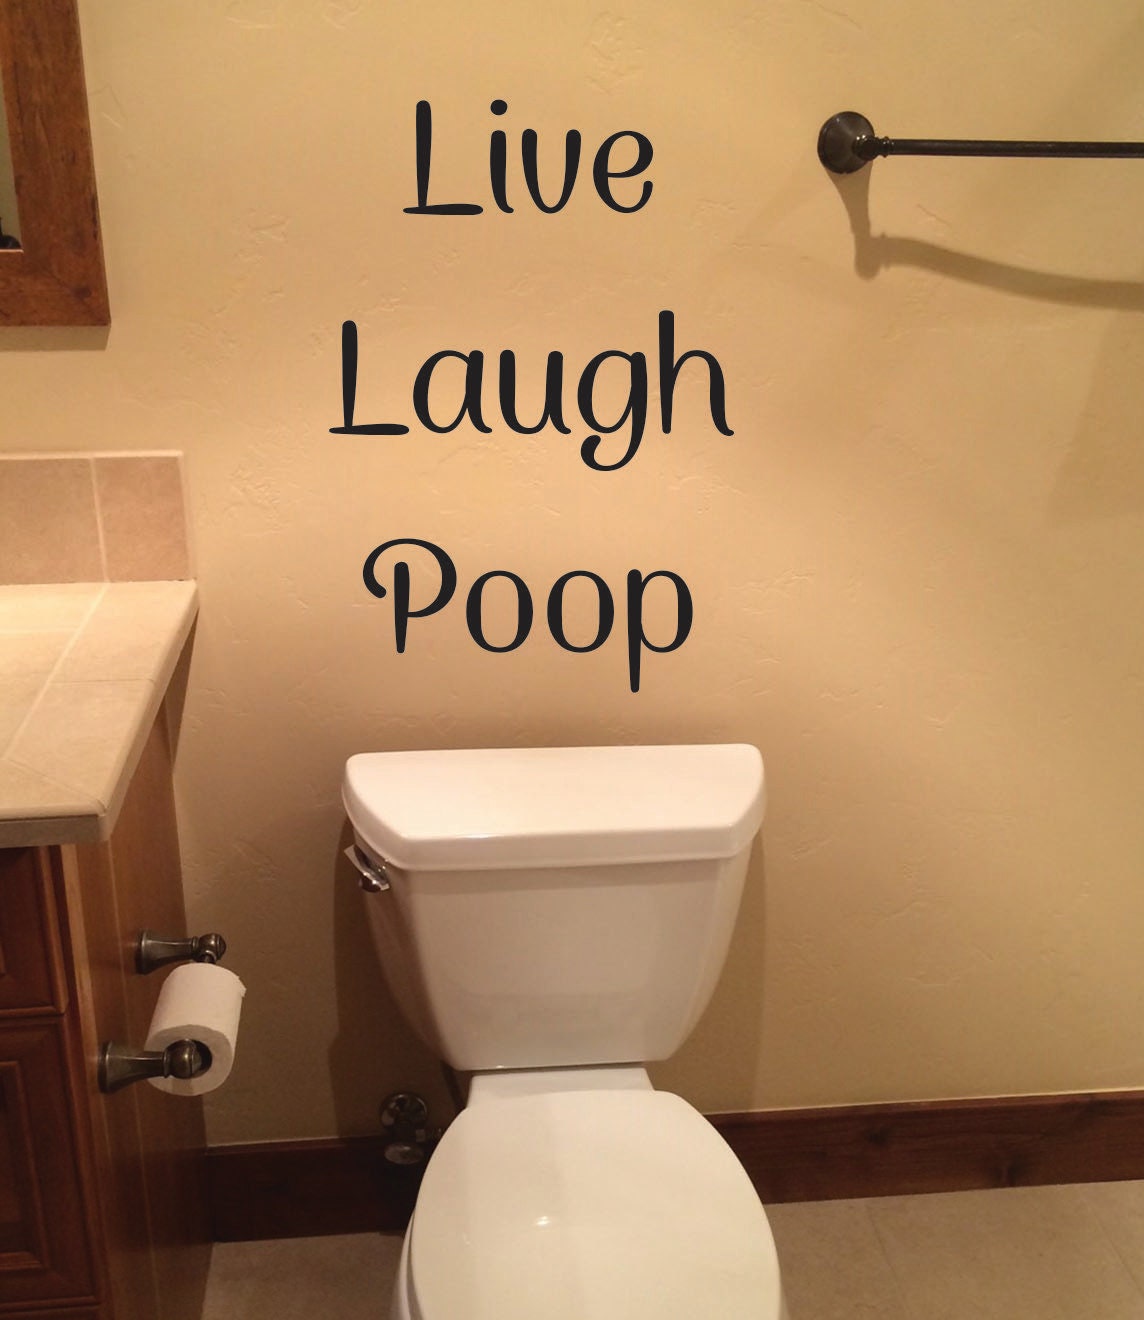 Funny Bathroom Wall Decor, Live Laugh Poop Wall Decal